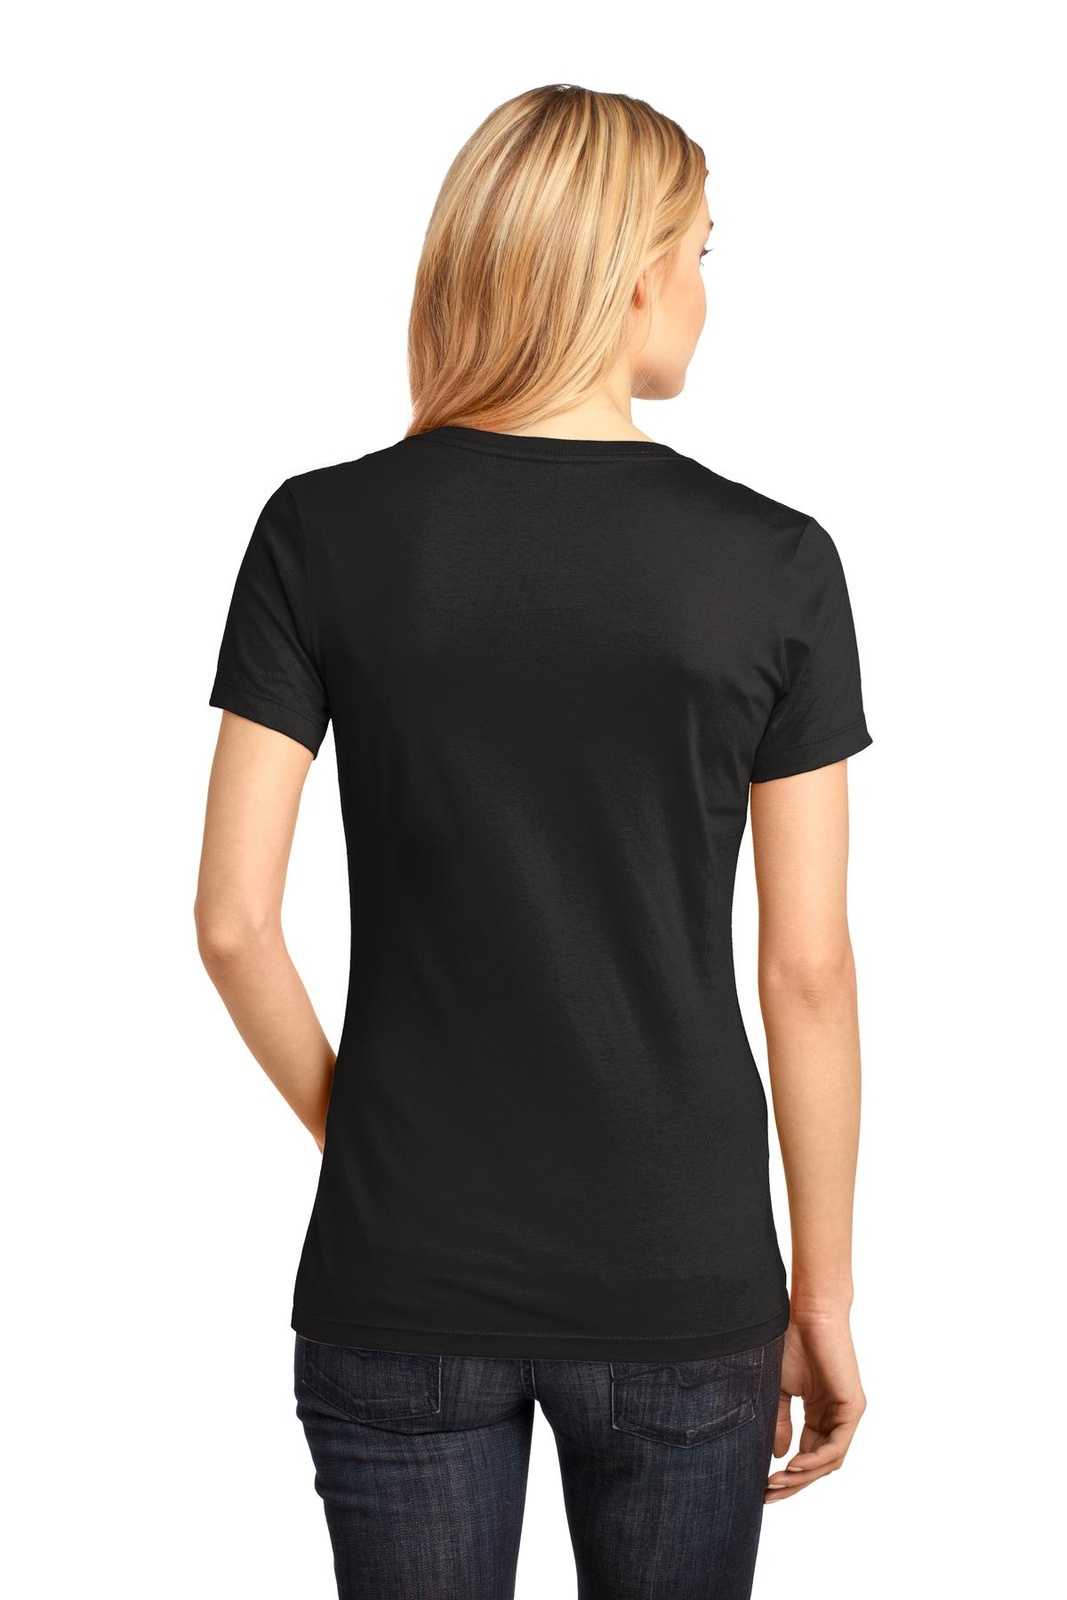 District DM1170L Women's Perfect Weight V-Neck Tee - Jet Black - HIT a Double - 1